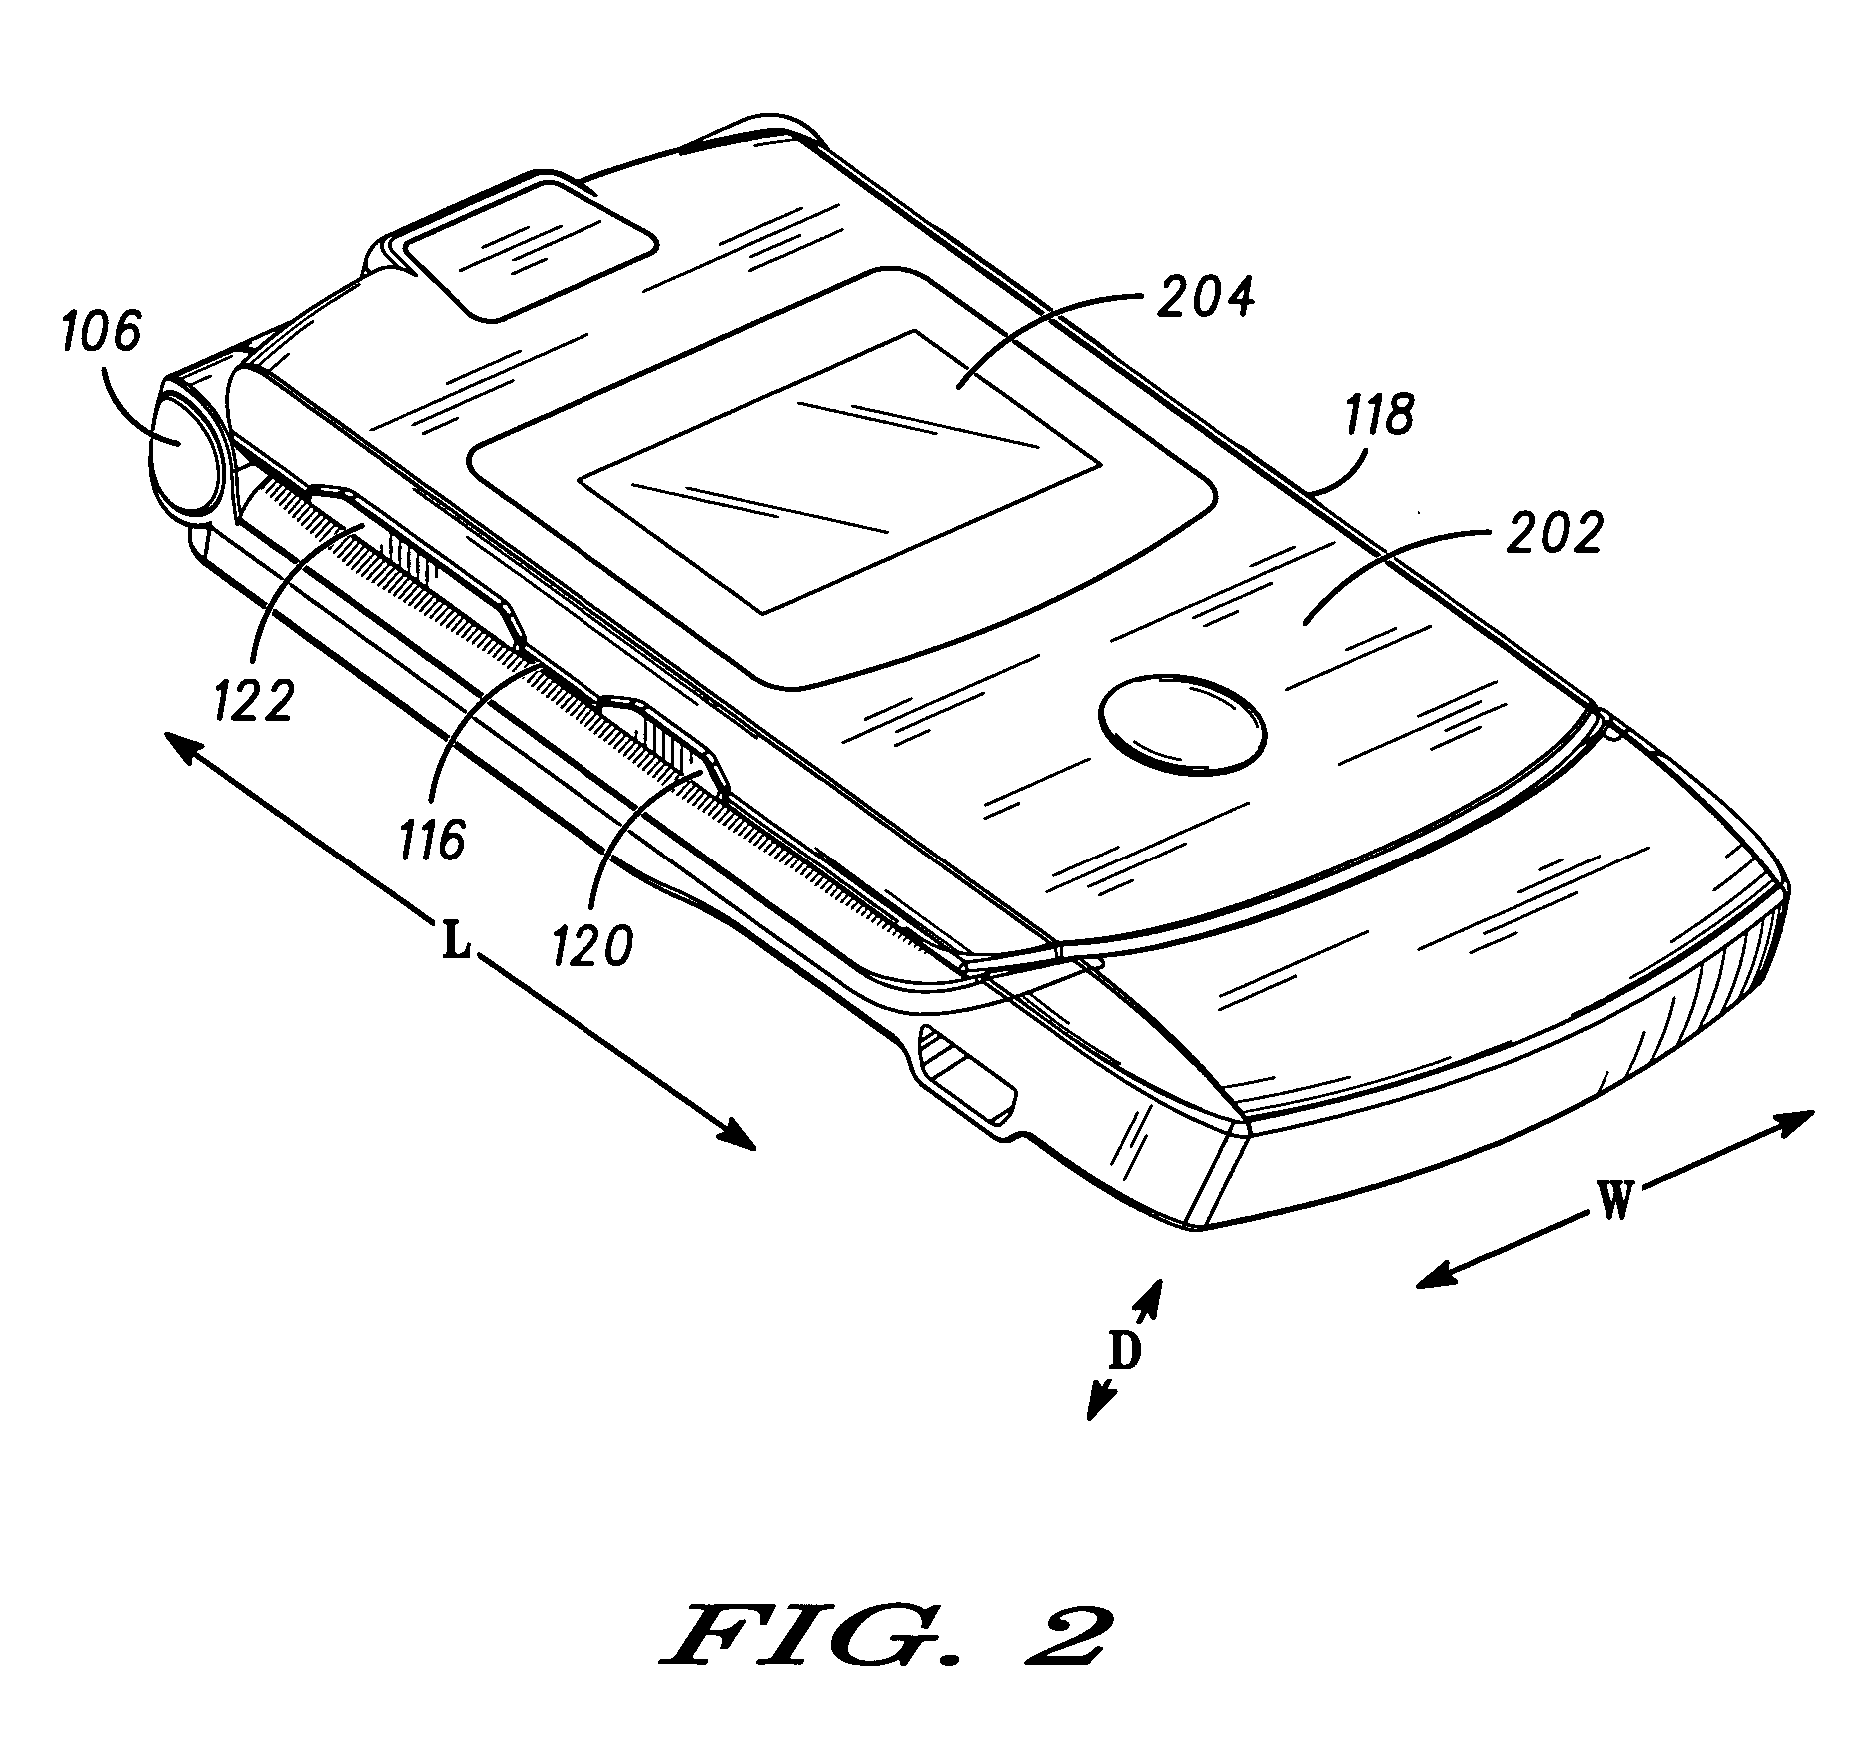 Mechanical layout and component placement for thin clamshell phone